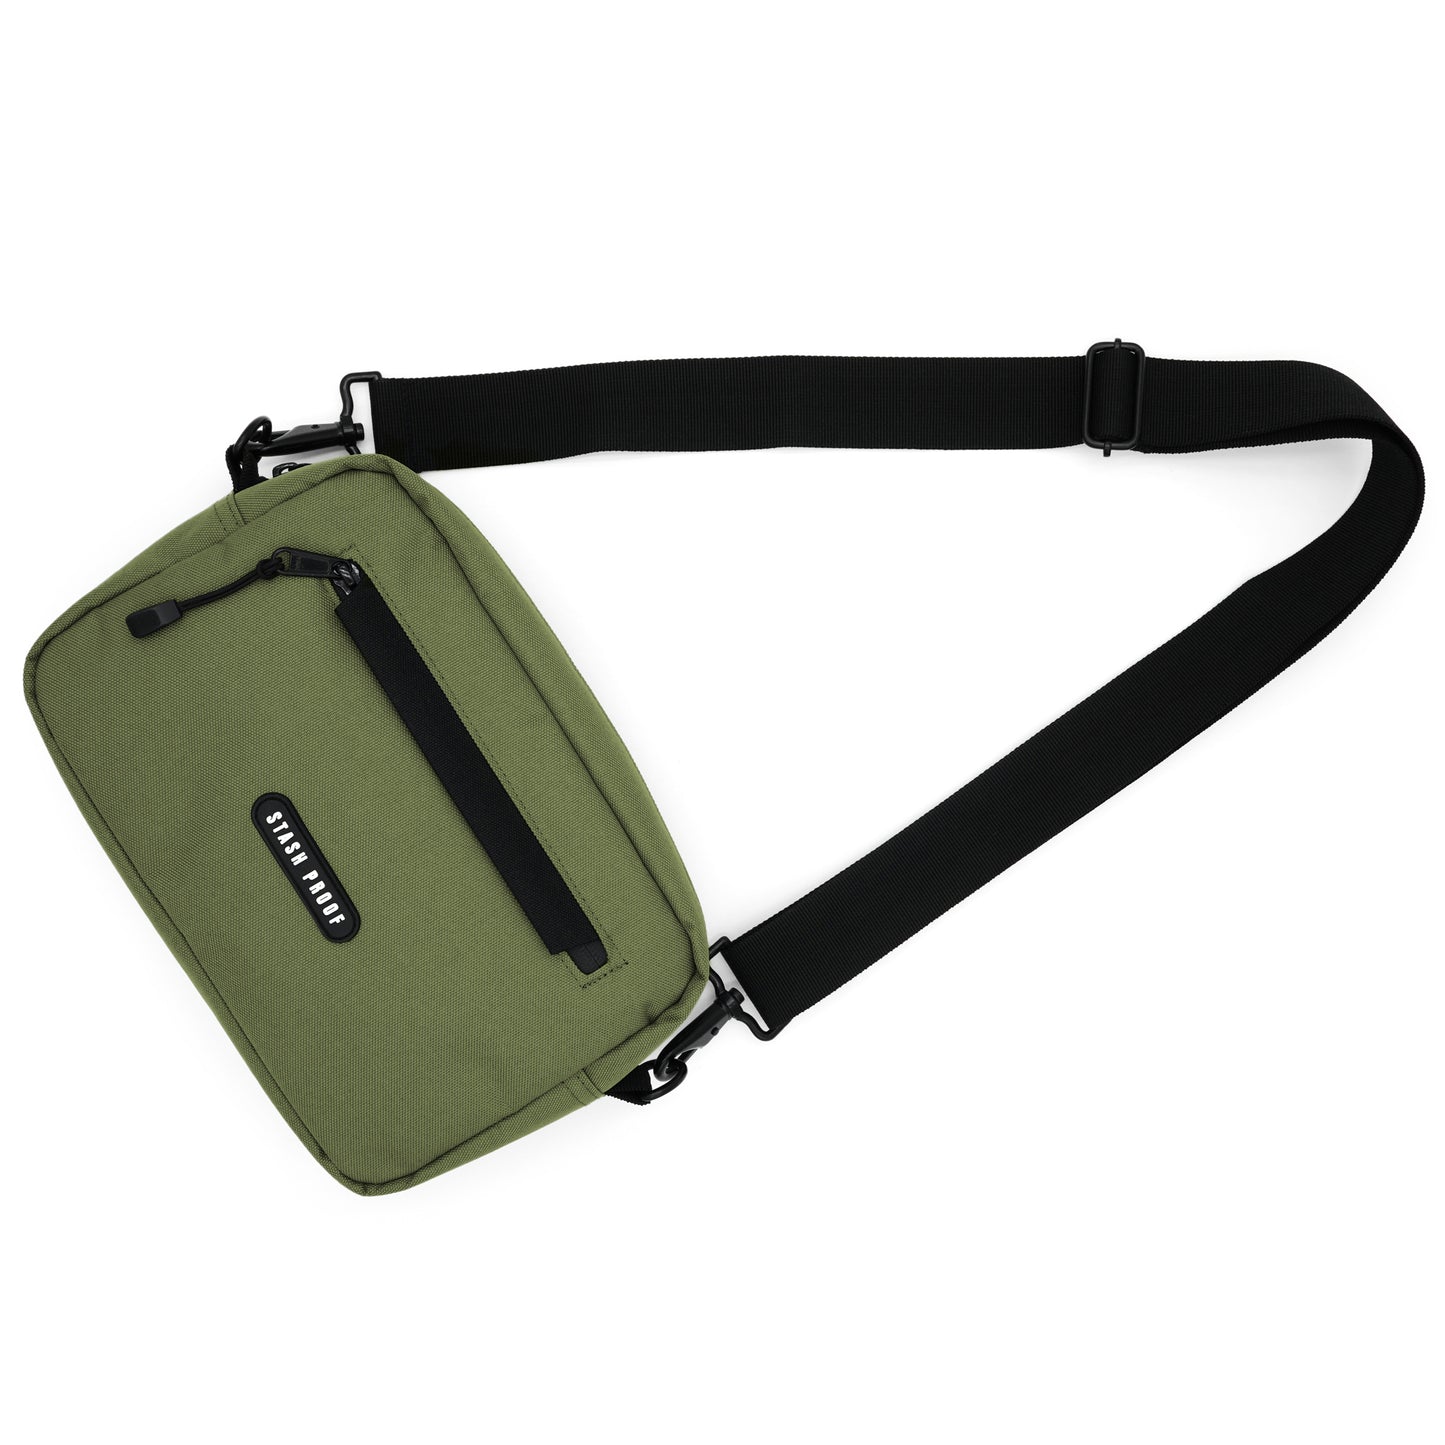 An olive green Stash Proof smell proof bag with strap, picture is taken at an angle 